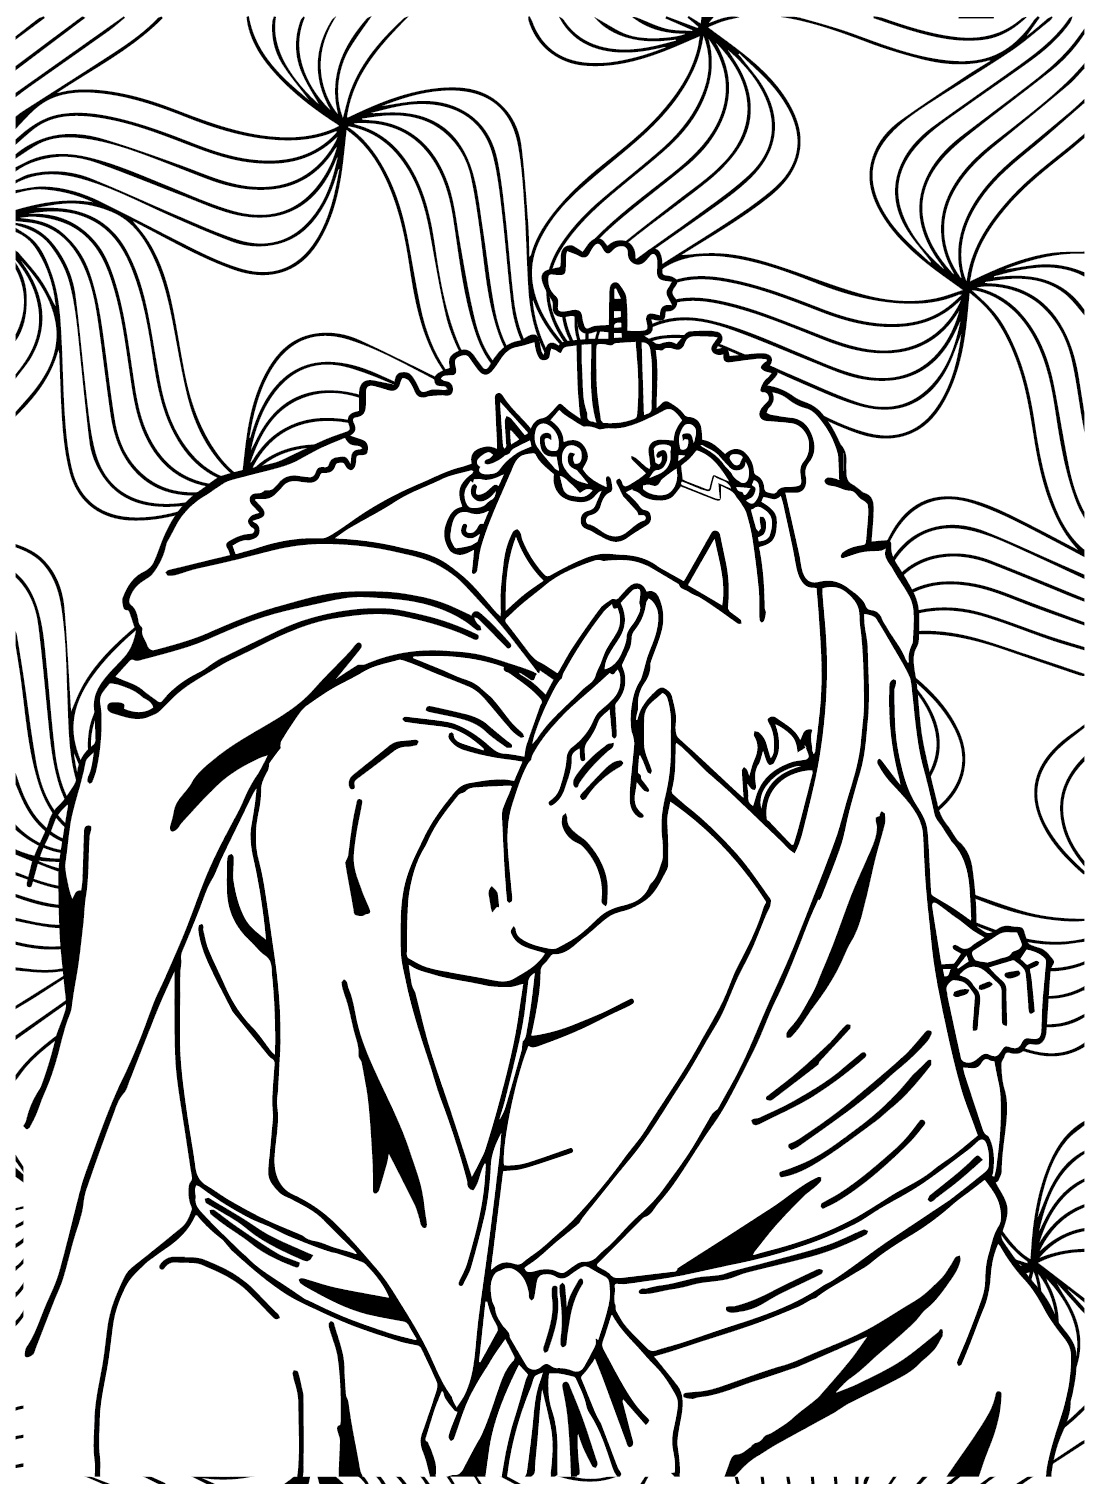 Character Jinbe Coloring Page from Jinbe